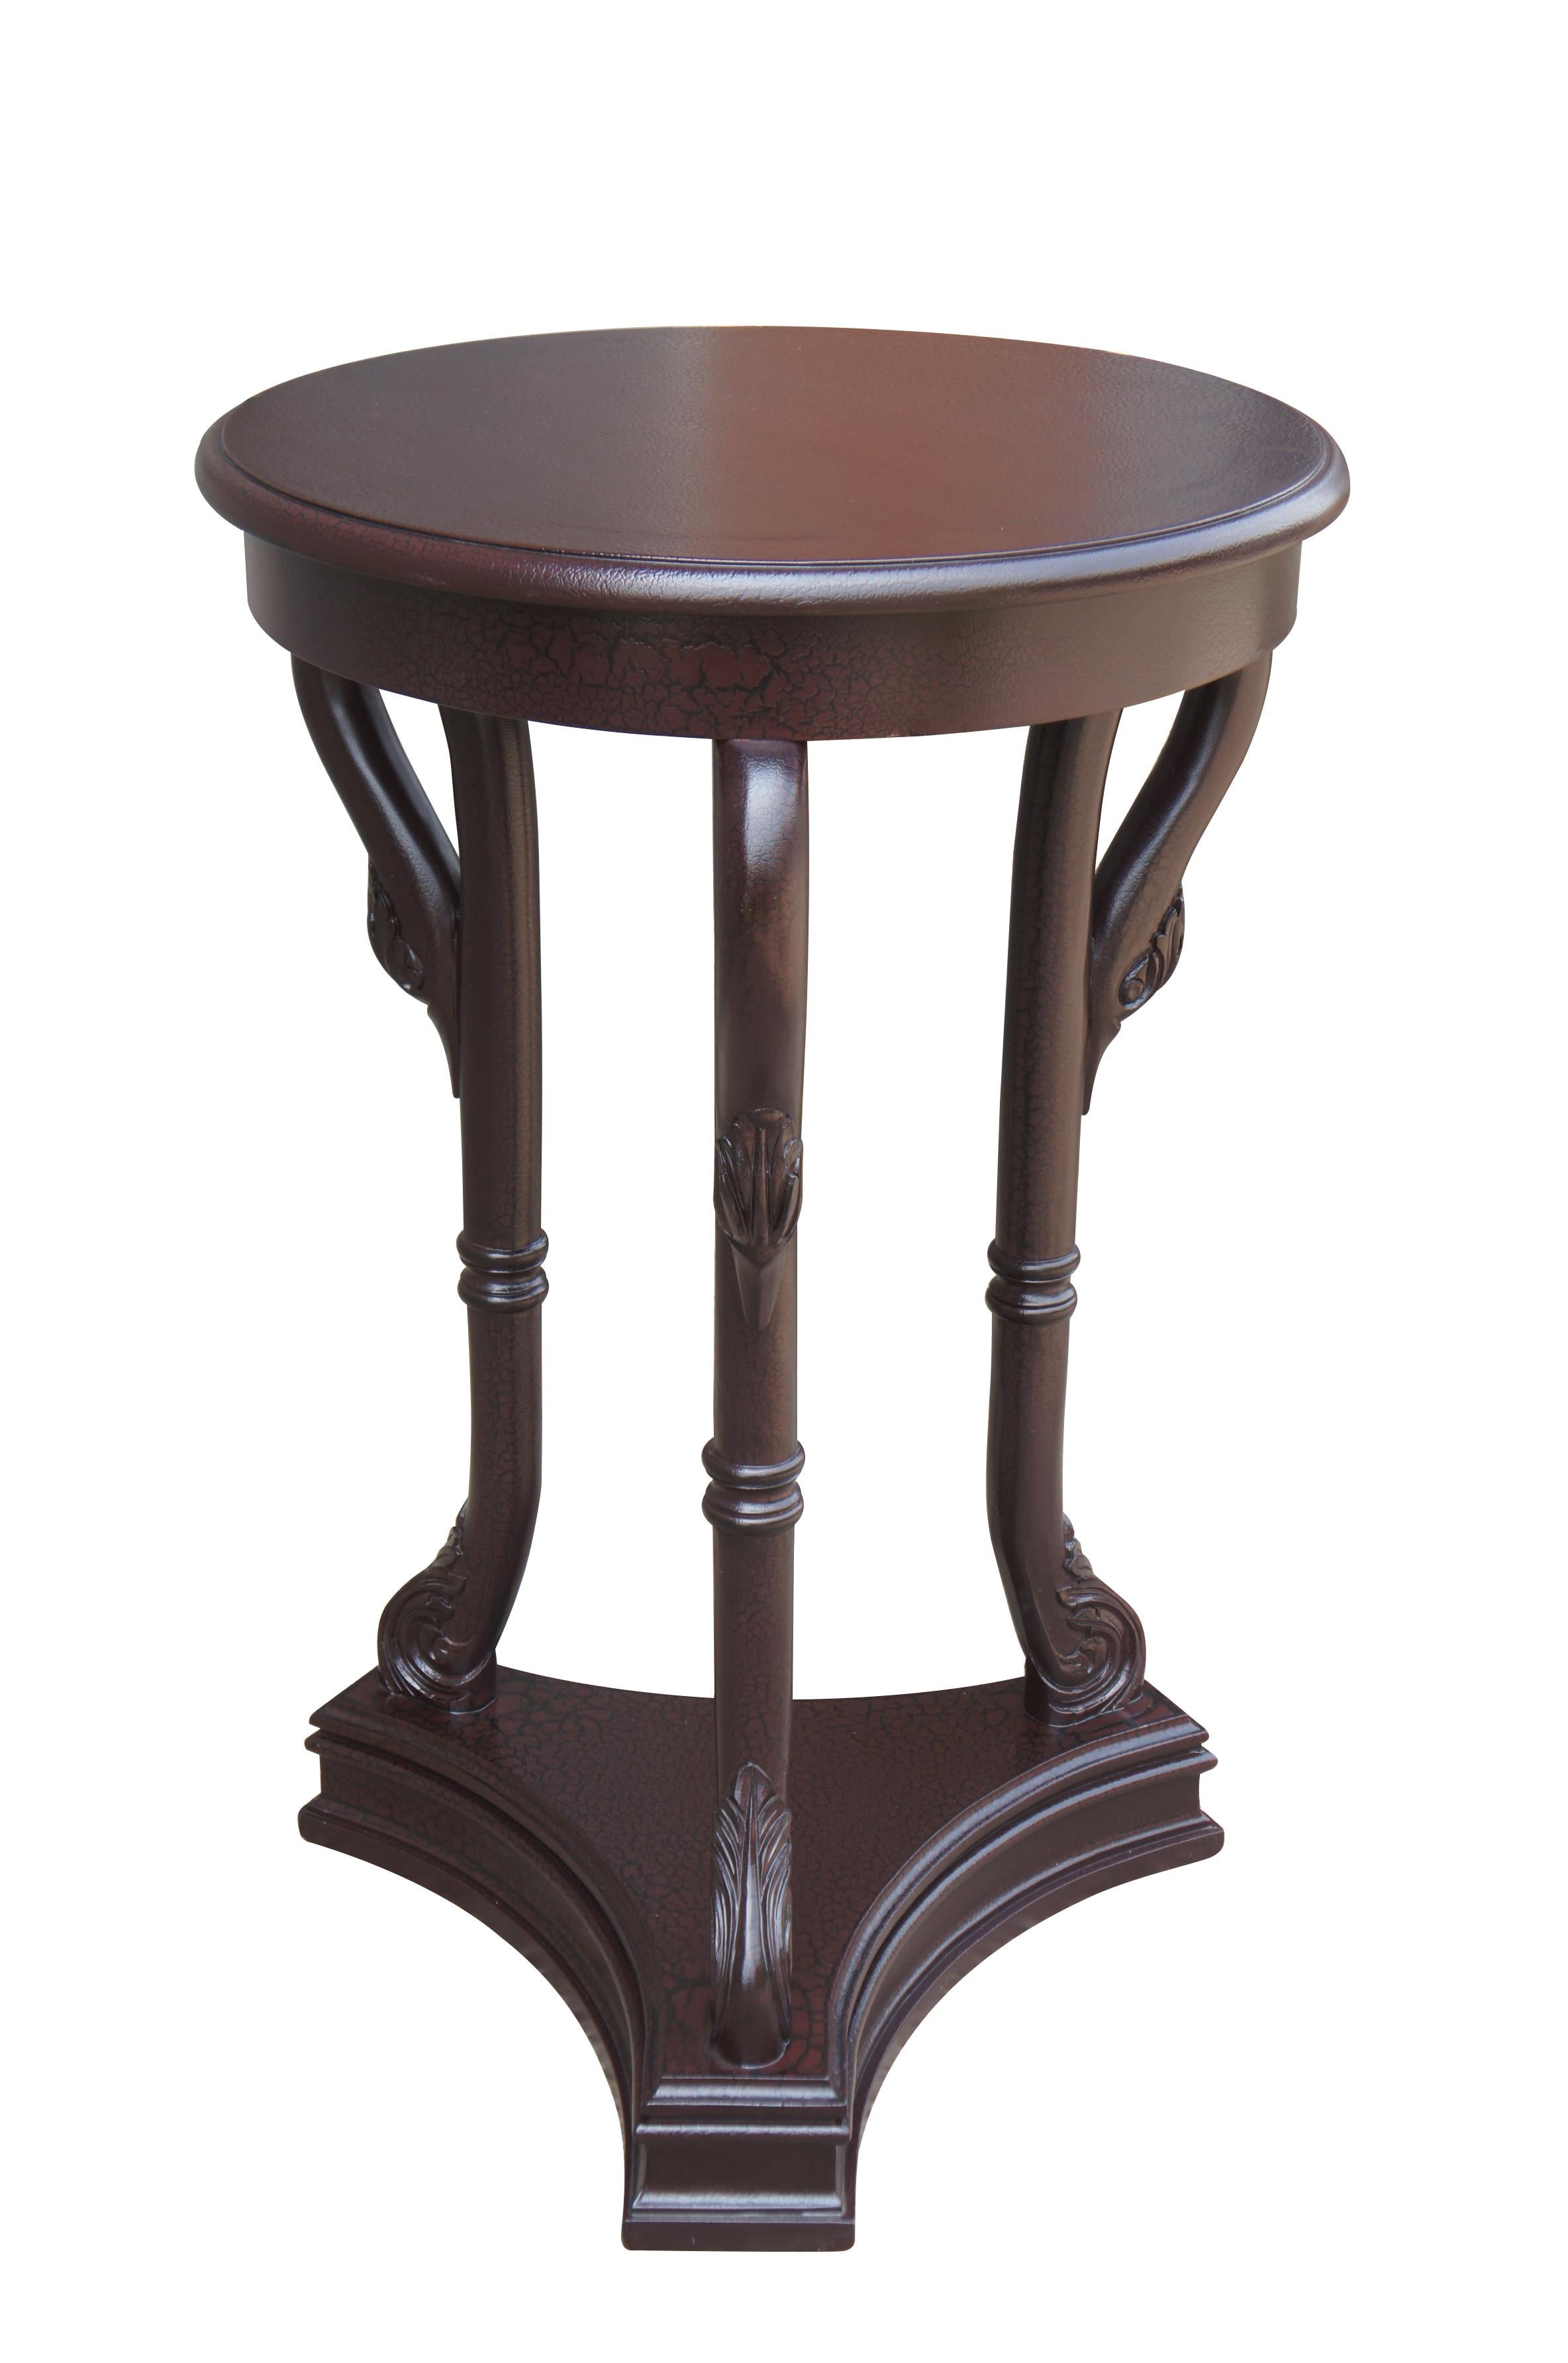 Stately French Directoire and Empire inspired Pedestal or Sculpture Stand. Made from hardwood with a crackle lacquer finish. Features three intricate downswept swan supports leading to an acanthus scrolled foot over a tripod base. Finish is a